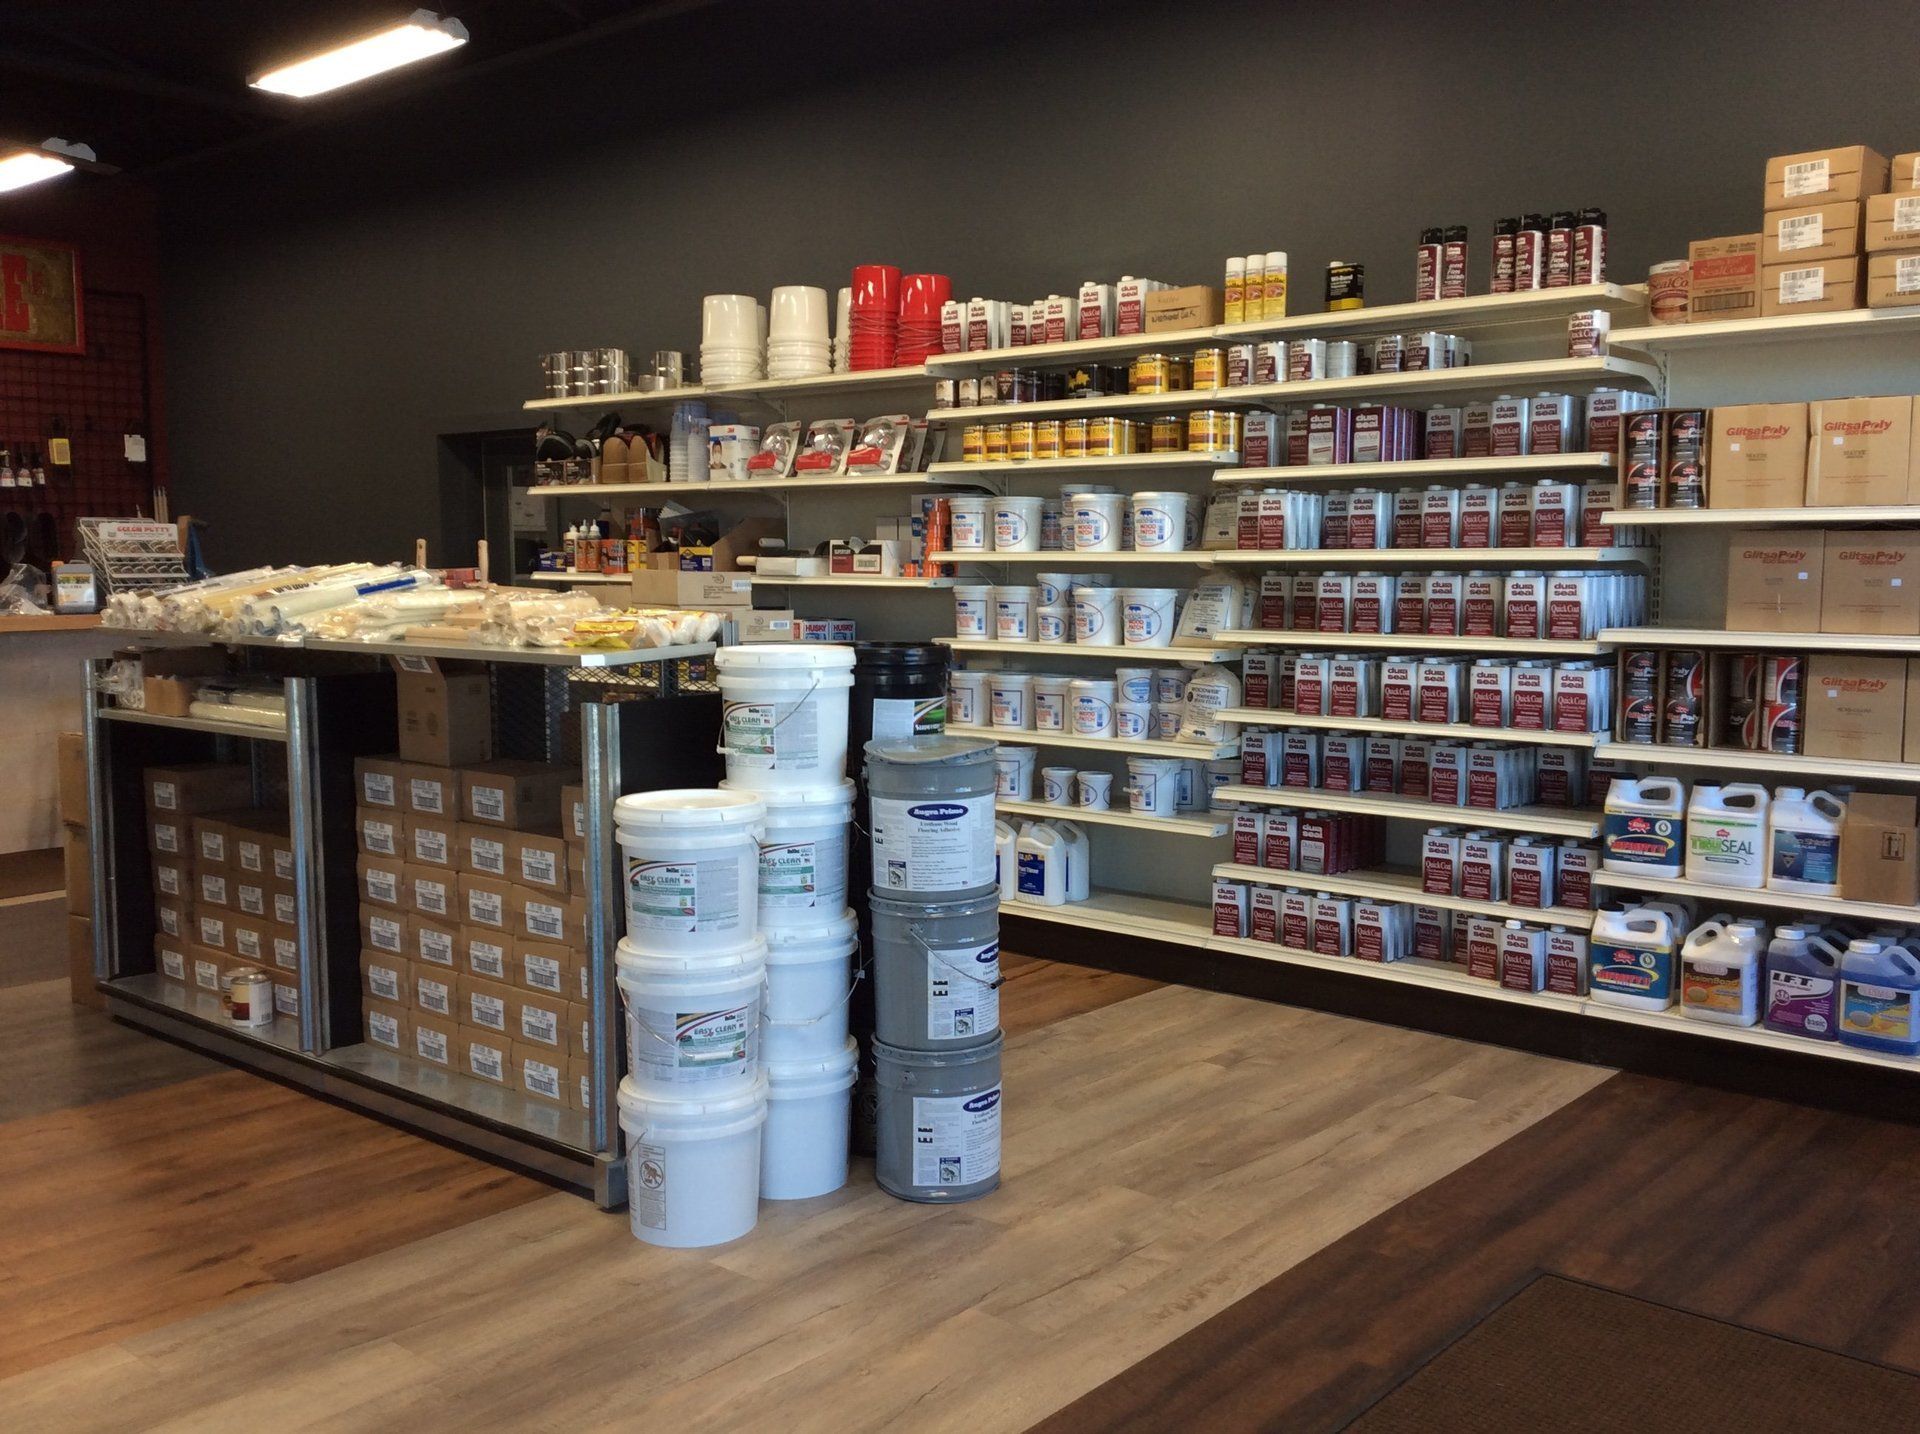 A store filled with lots of shelves and buckets of paint.